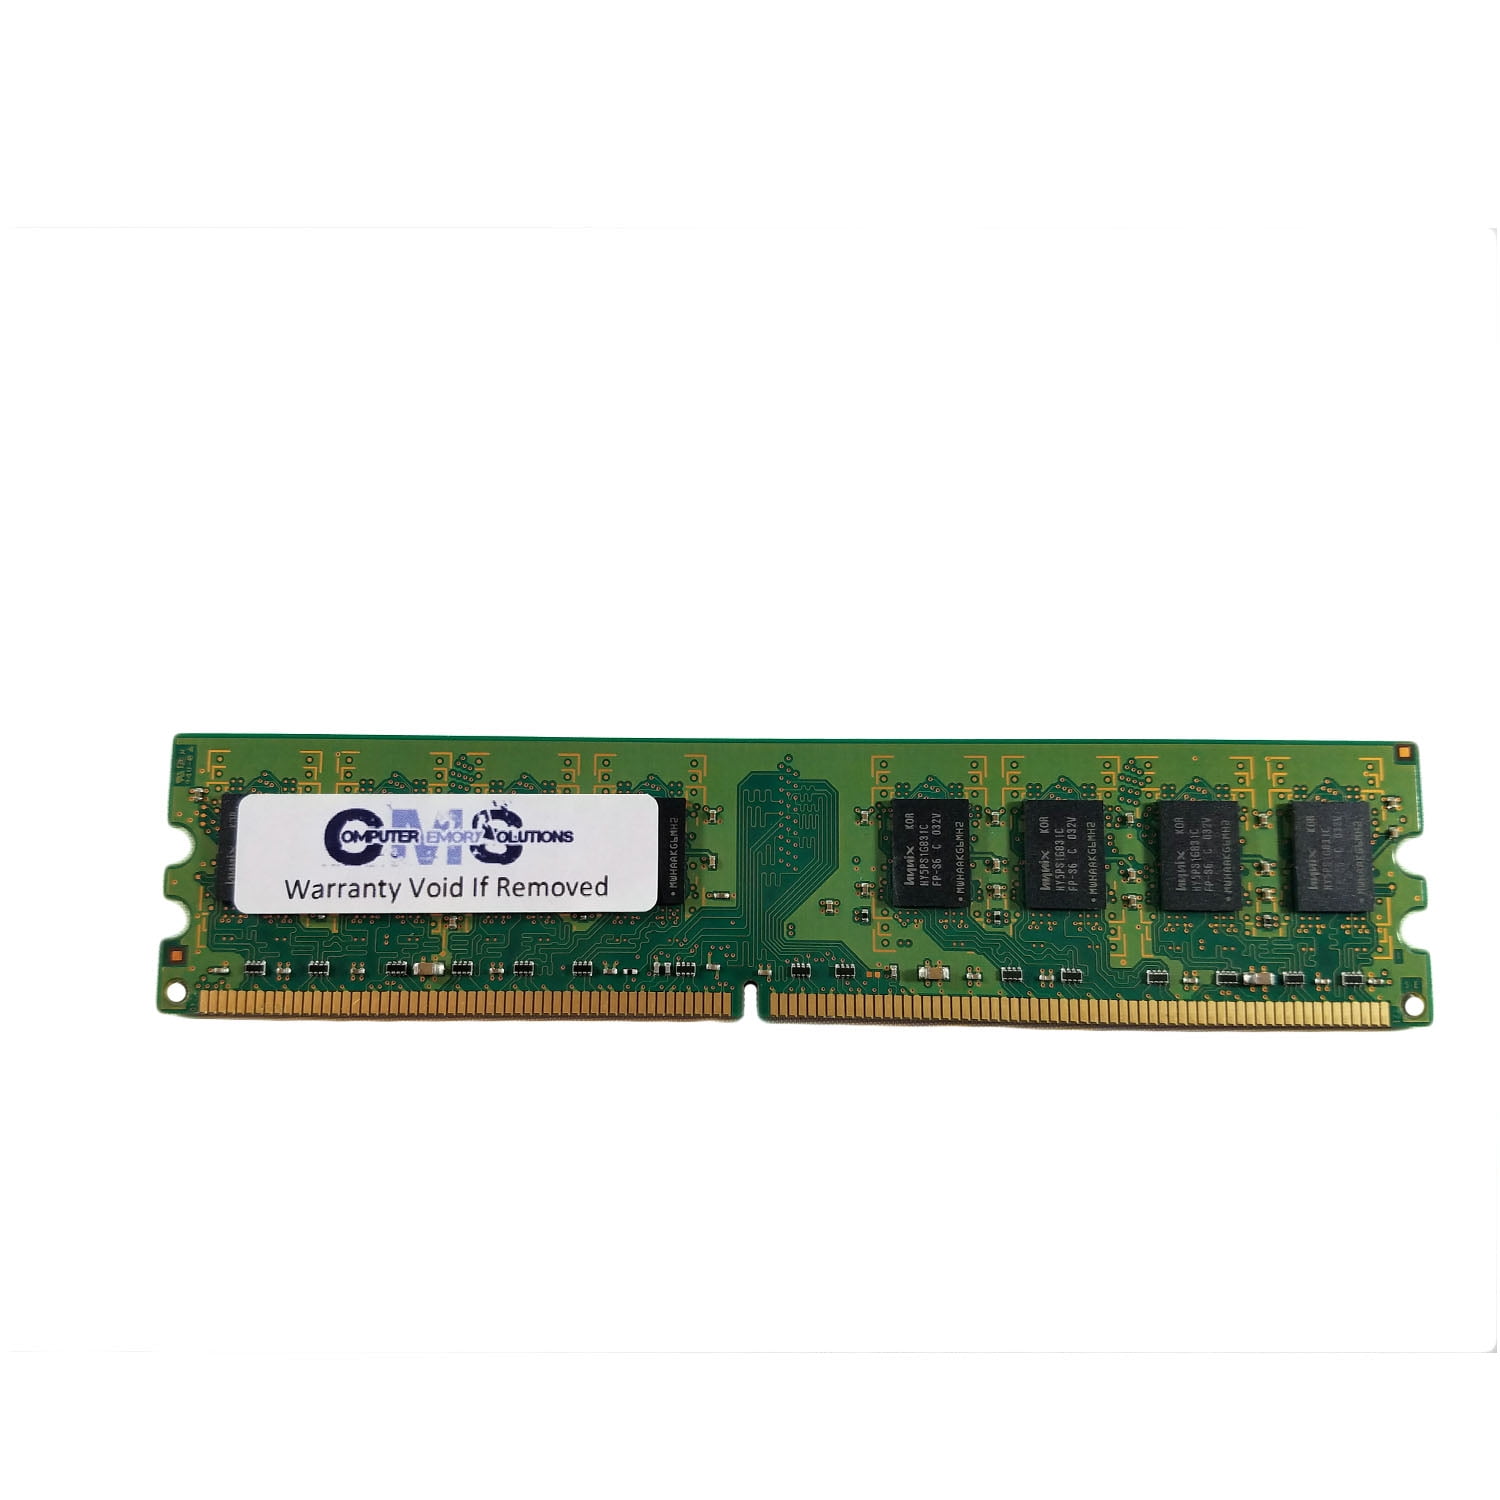 CMS 4GB A79 2X2GB DDR3 10600 1333MHZ Non ECC DIMM Memory Ram Upgrade Compatible with HP/Compaq® Compaq 8100 Elite Small Form Factor Business Pc